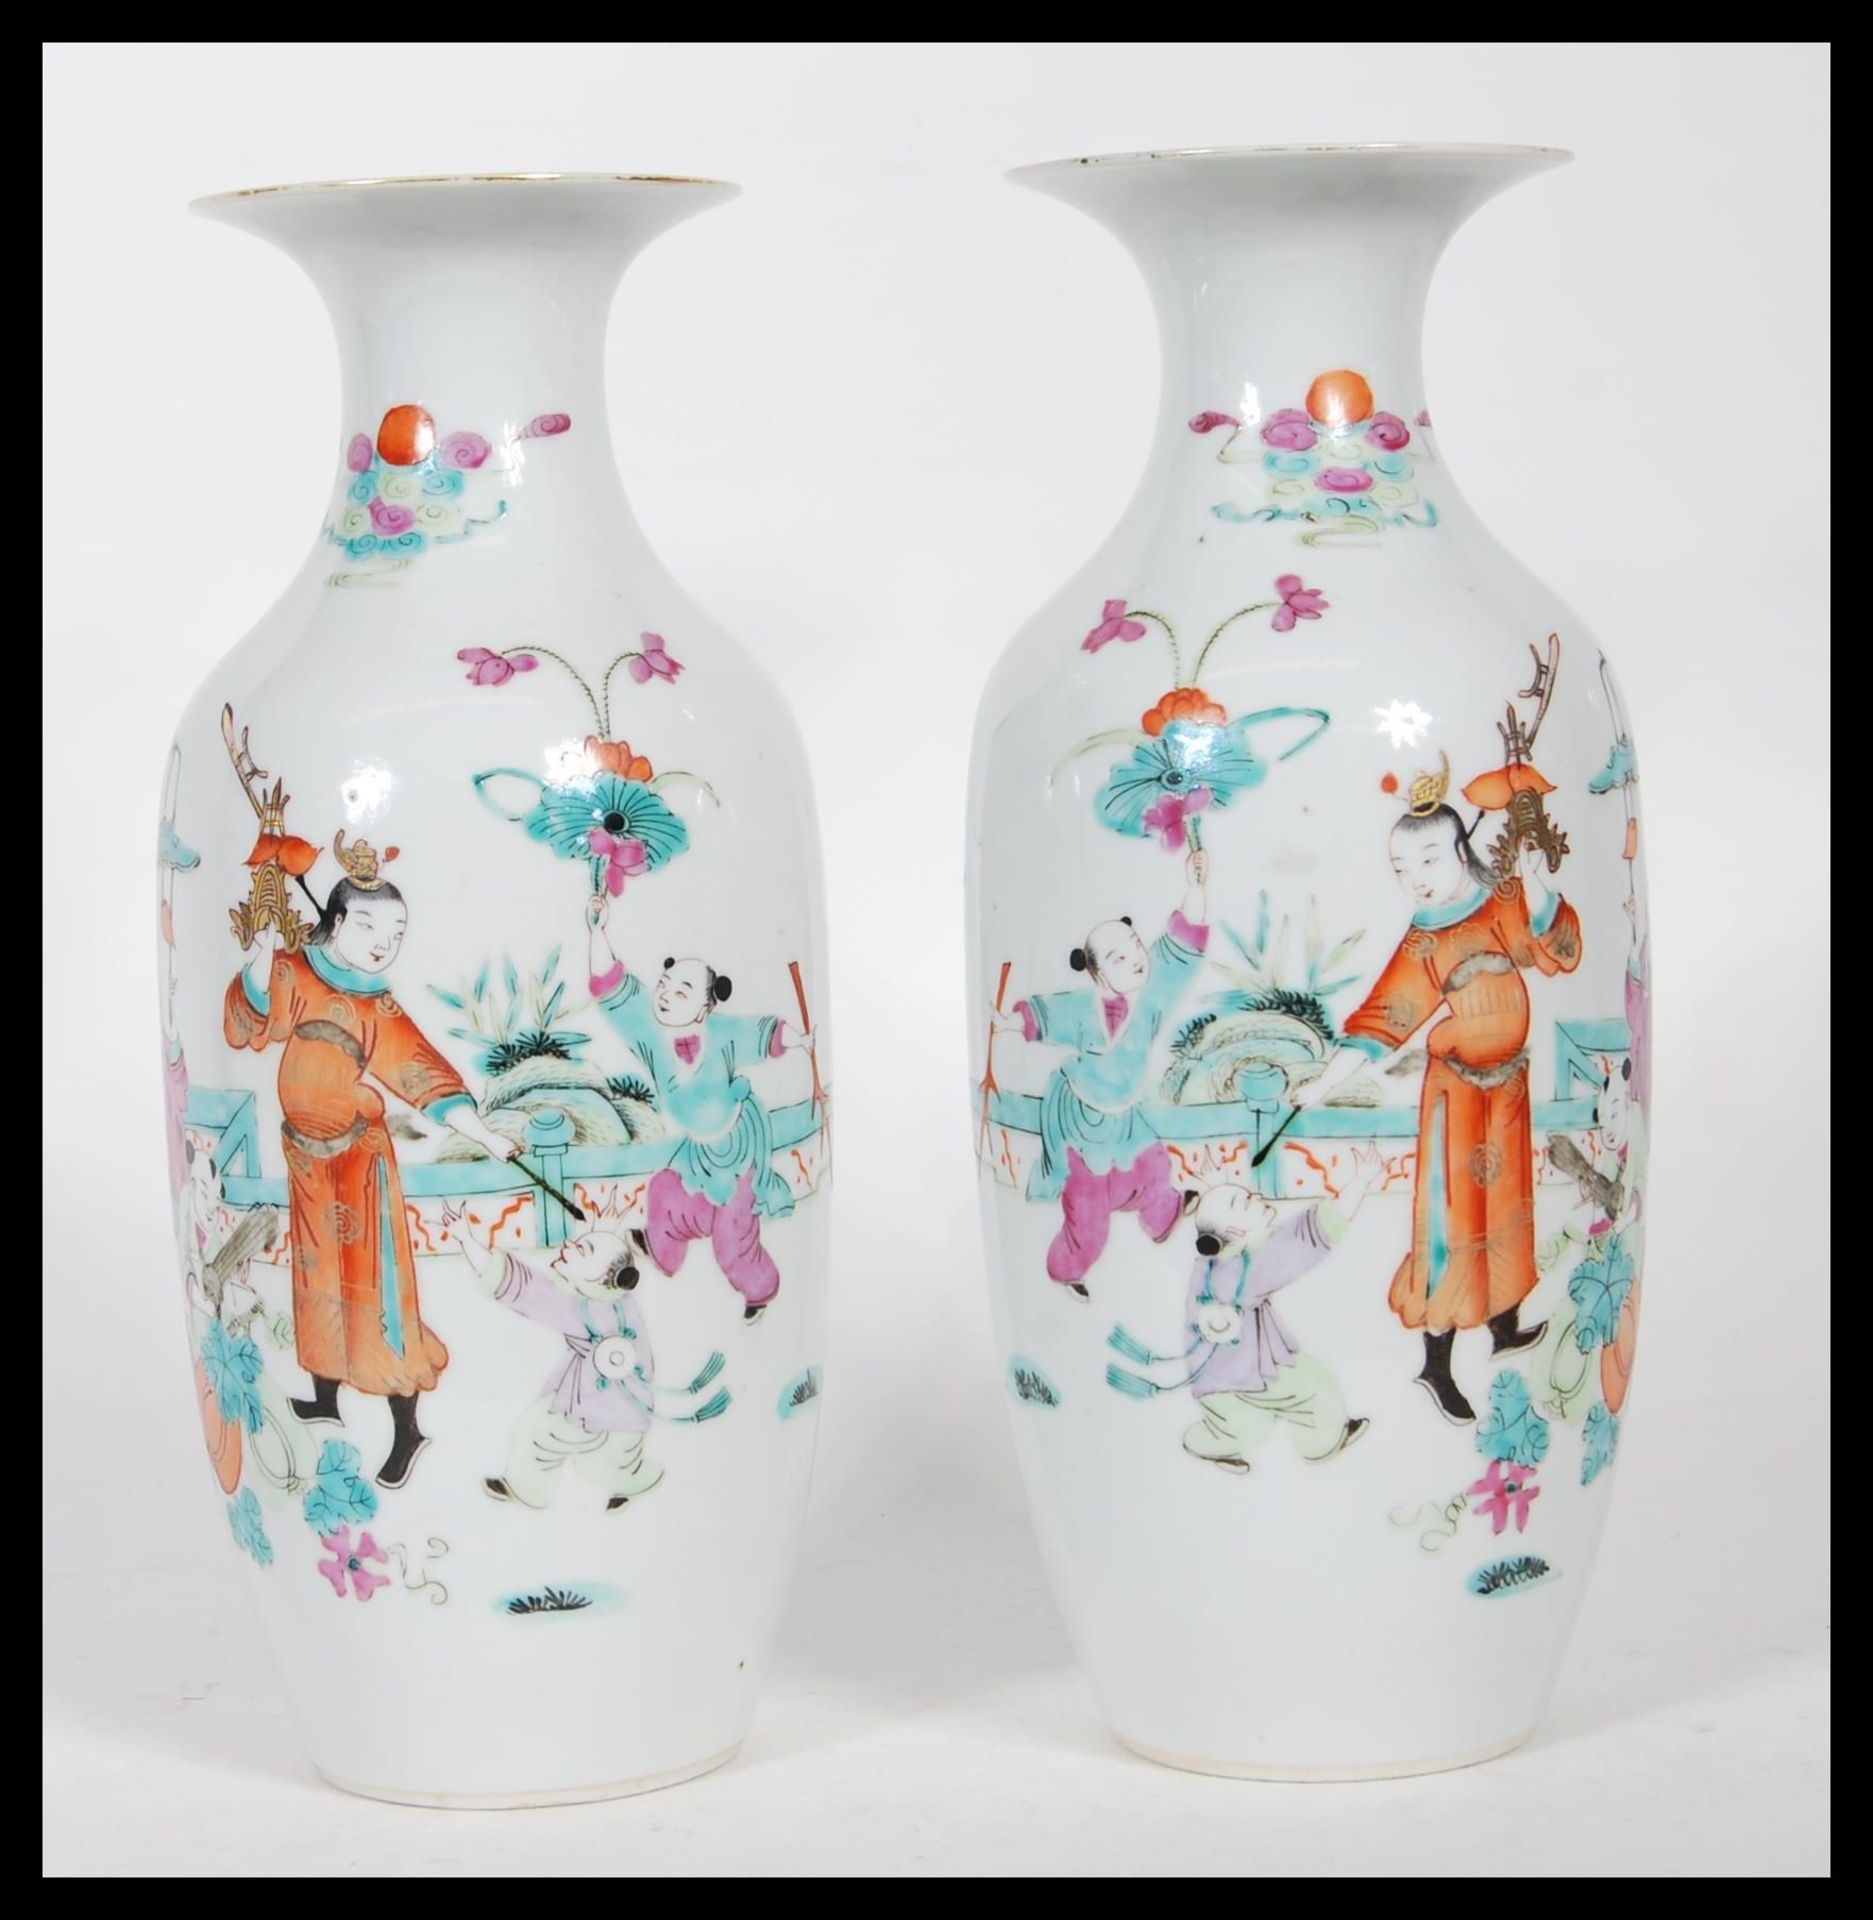 A matching pair of early 20th Century vases of baluster form, being hand painted decorated in